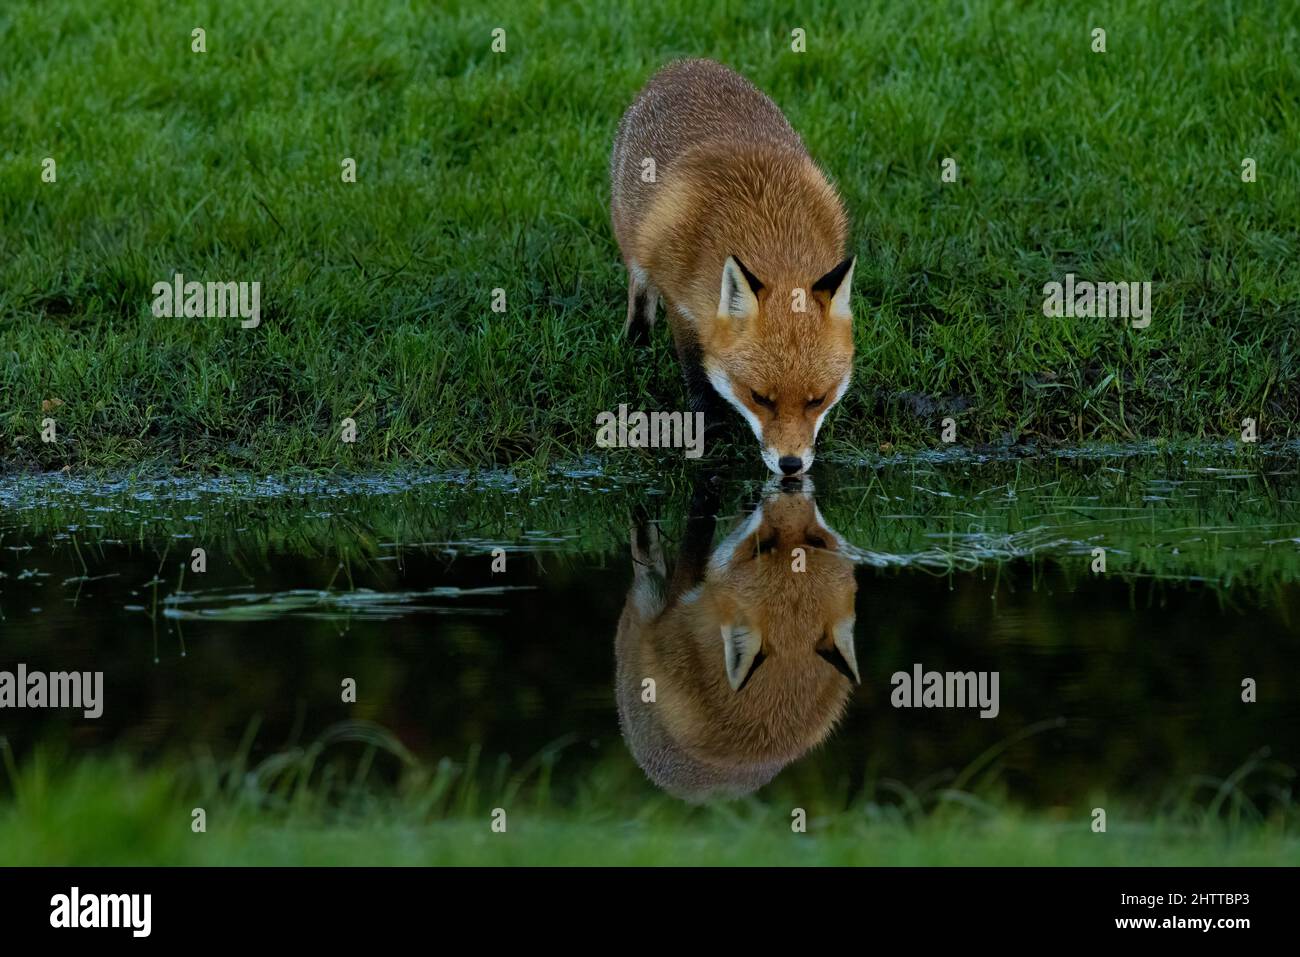 A beautiful fox drinking water from the river in a forest Stock Photo